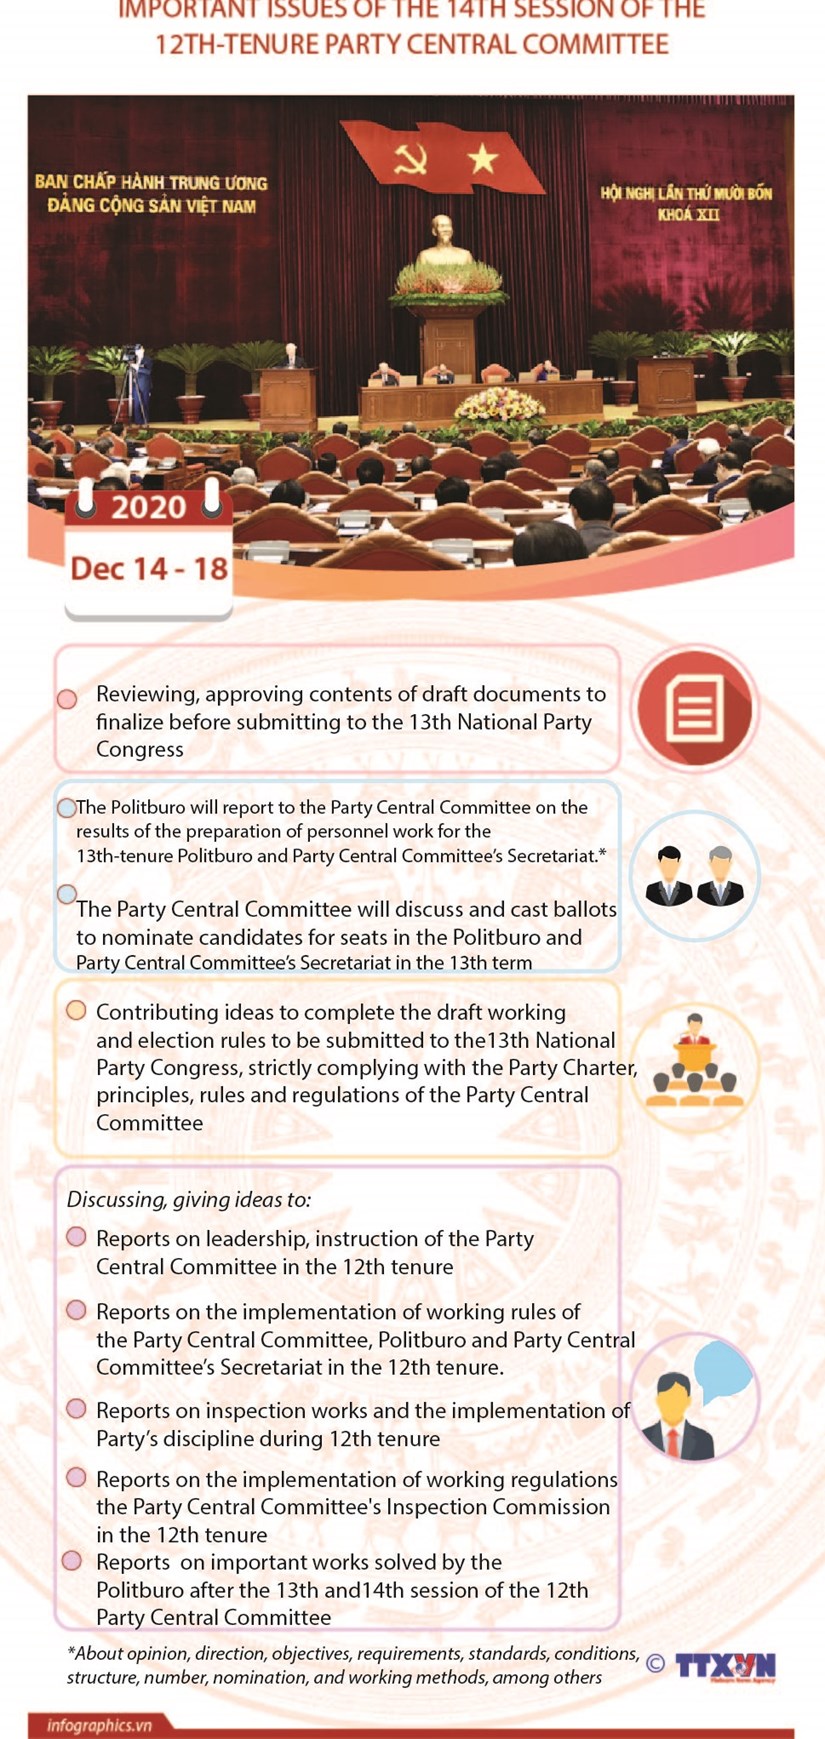 Important issues of Party Central Committee's 14th session